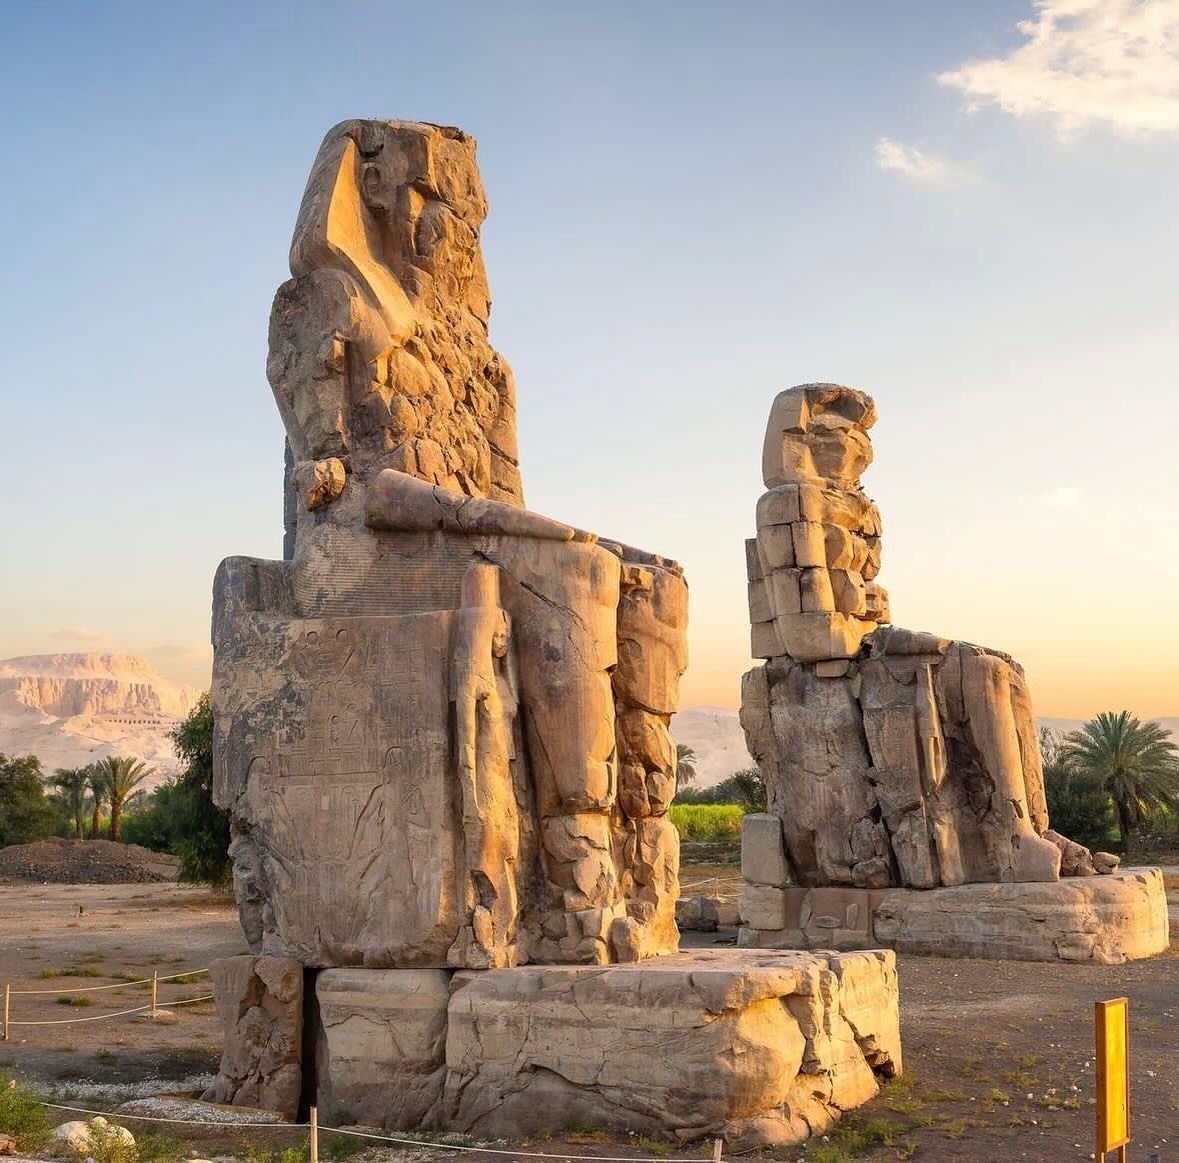 The Colossi of Memnon, representing King Amenhotep III, once stood in front of the pylon gates of his mortuary temple in the West Bank of Luxor. 

The temple was the largest temple in the Theban Necropolis. An earthquake in ancient times destroyed th